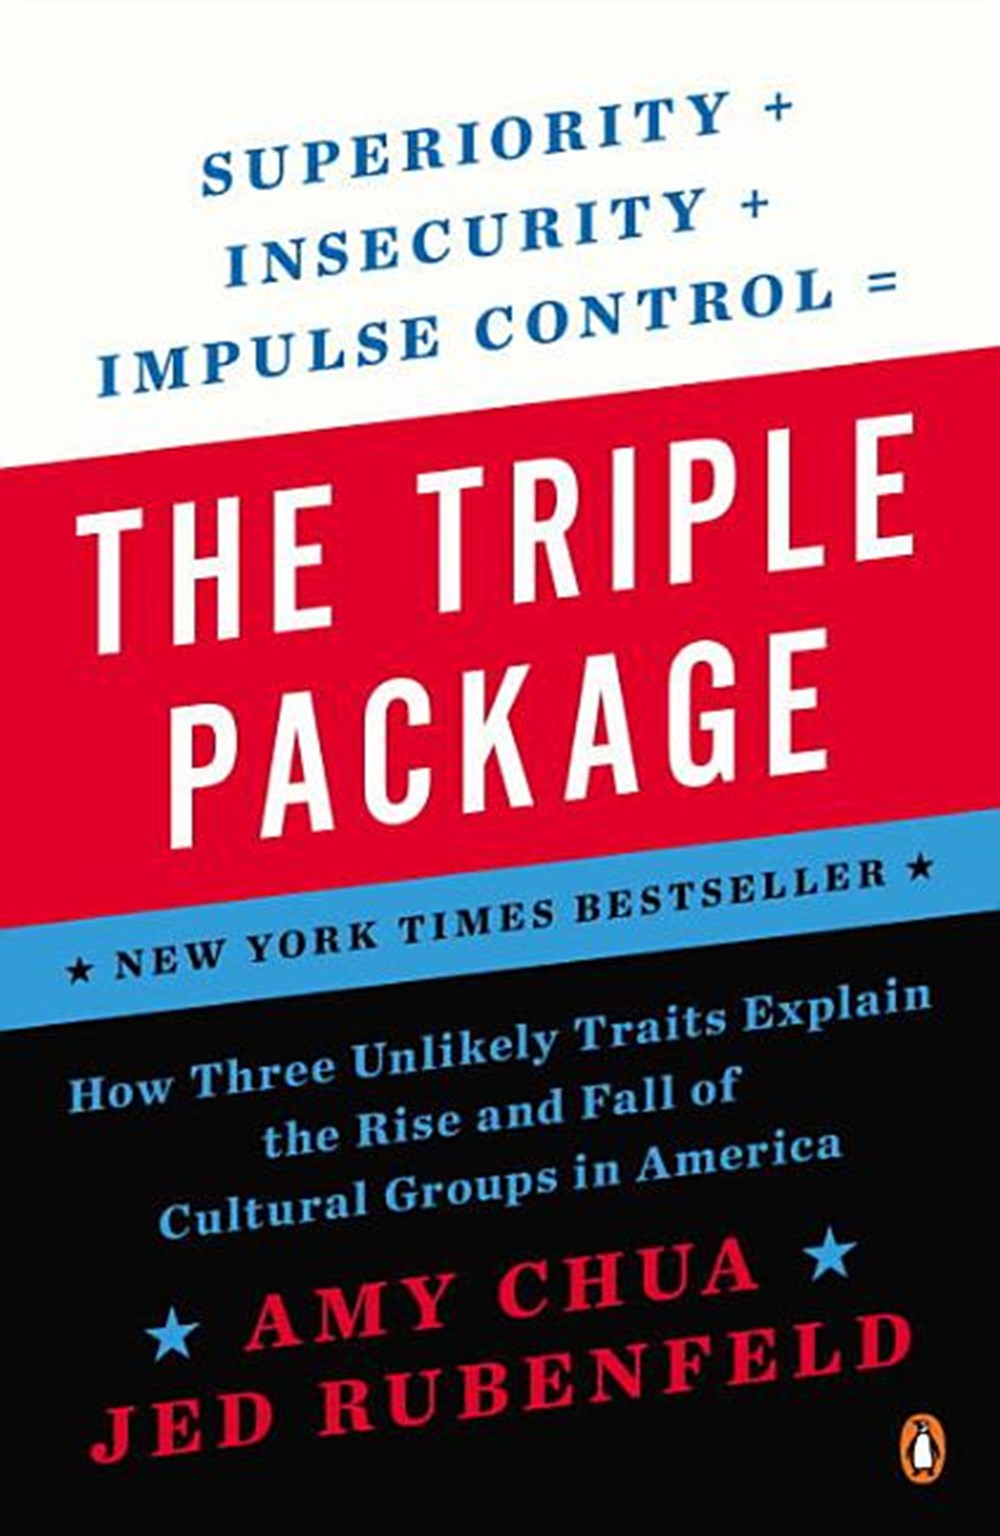 Triple Package: How Three Unlikely Traits Explain the Rise and Fall of Cultural Groups in America